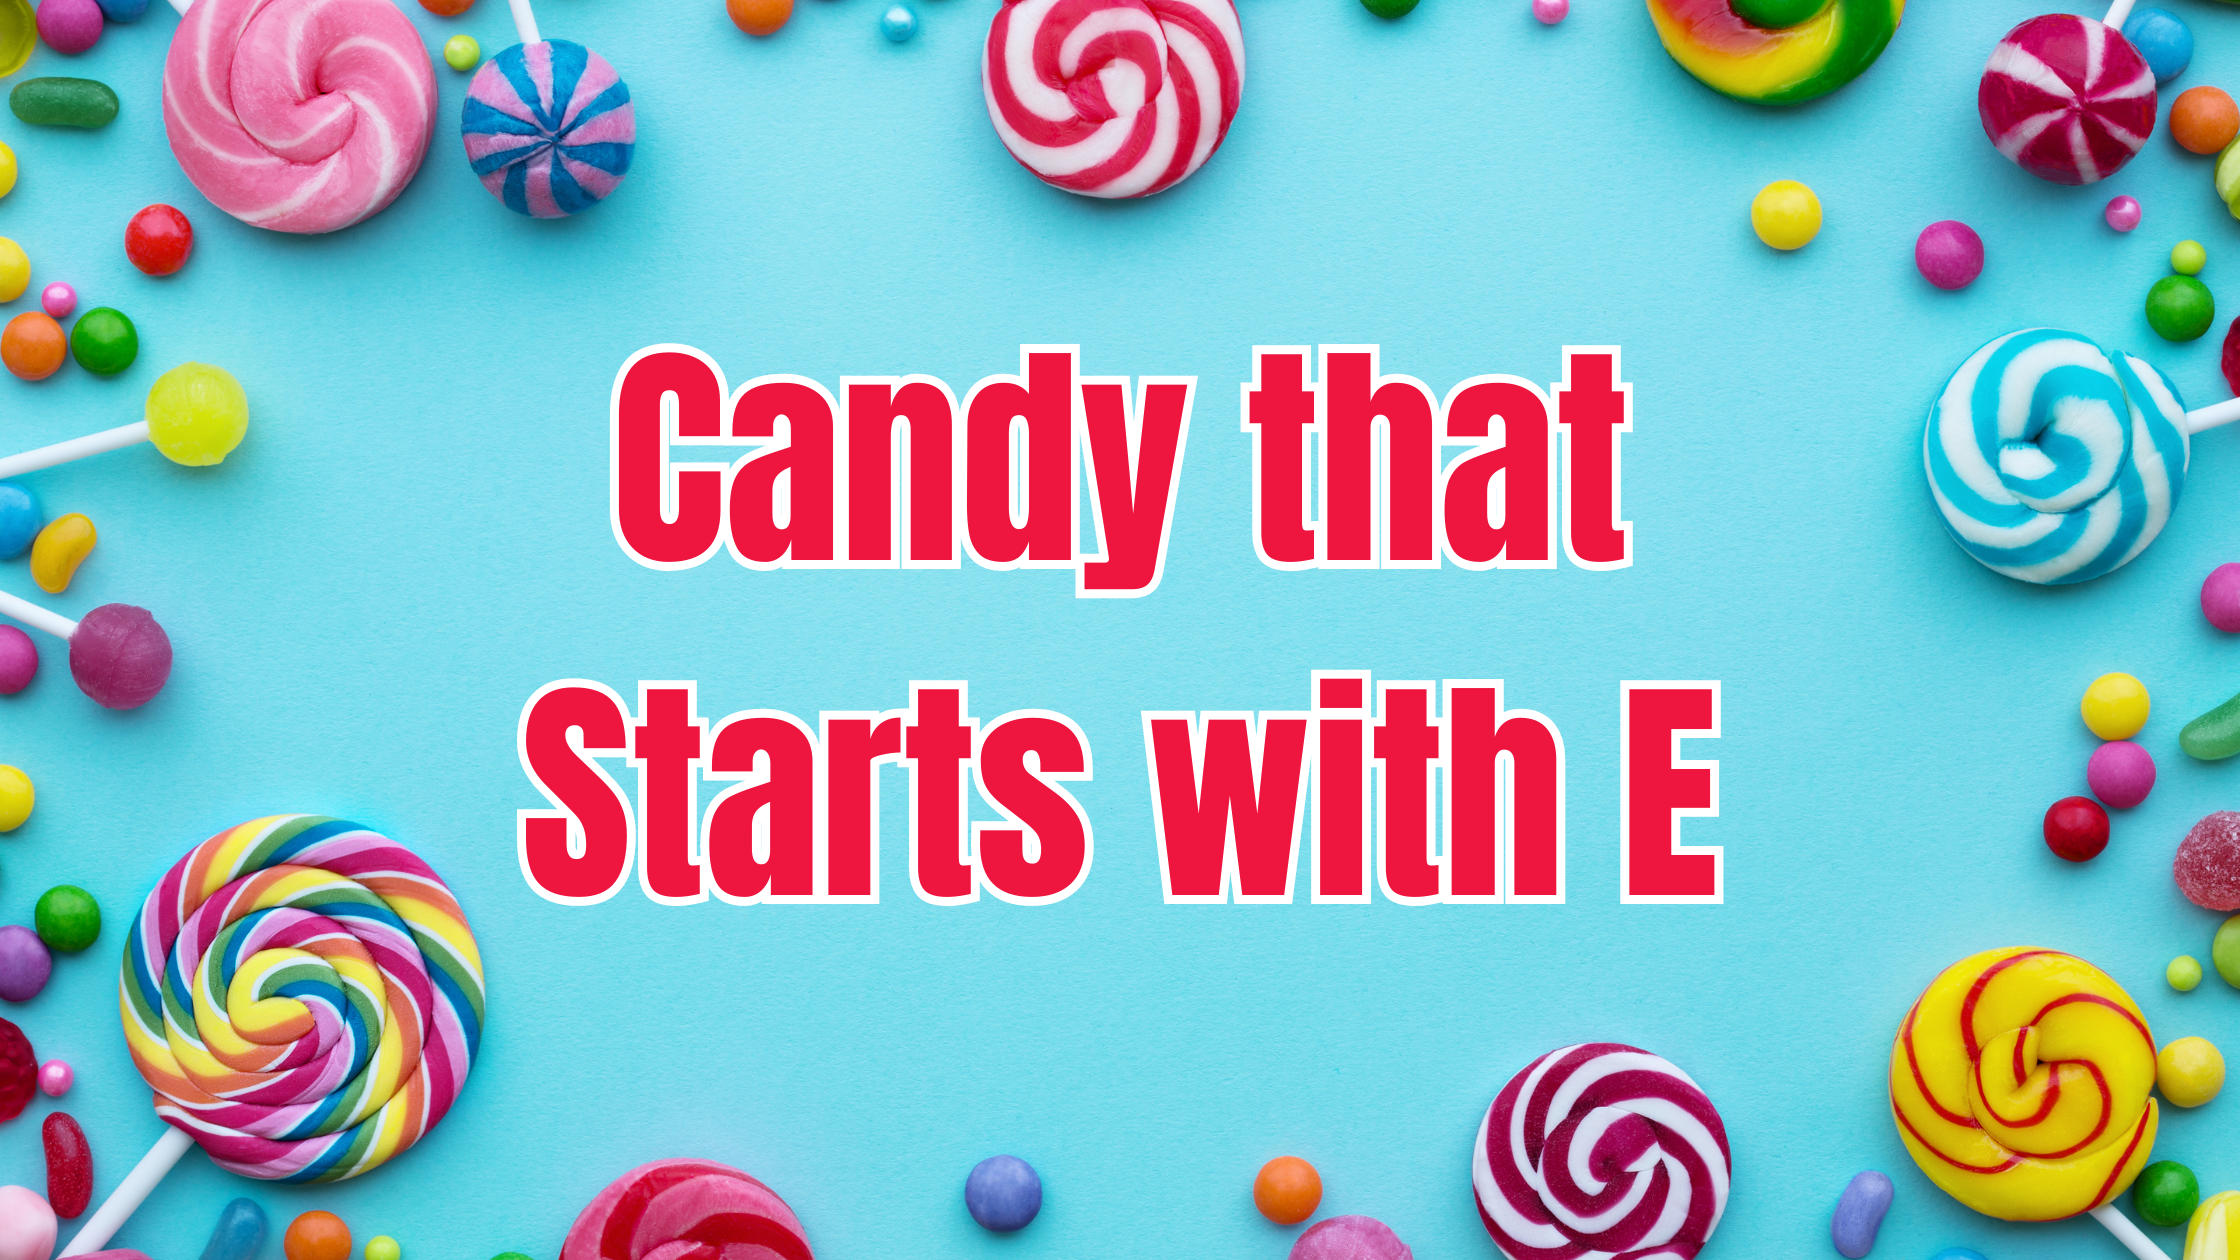 American Candy that Starts with E